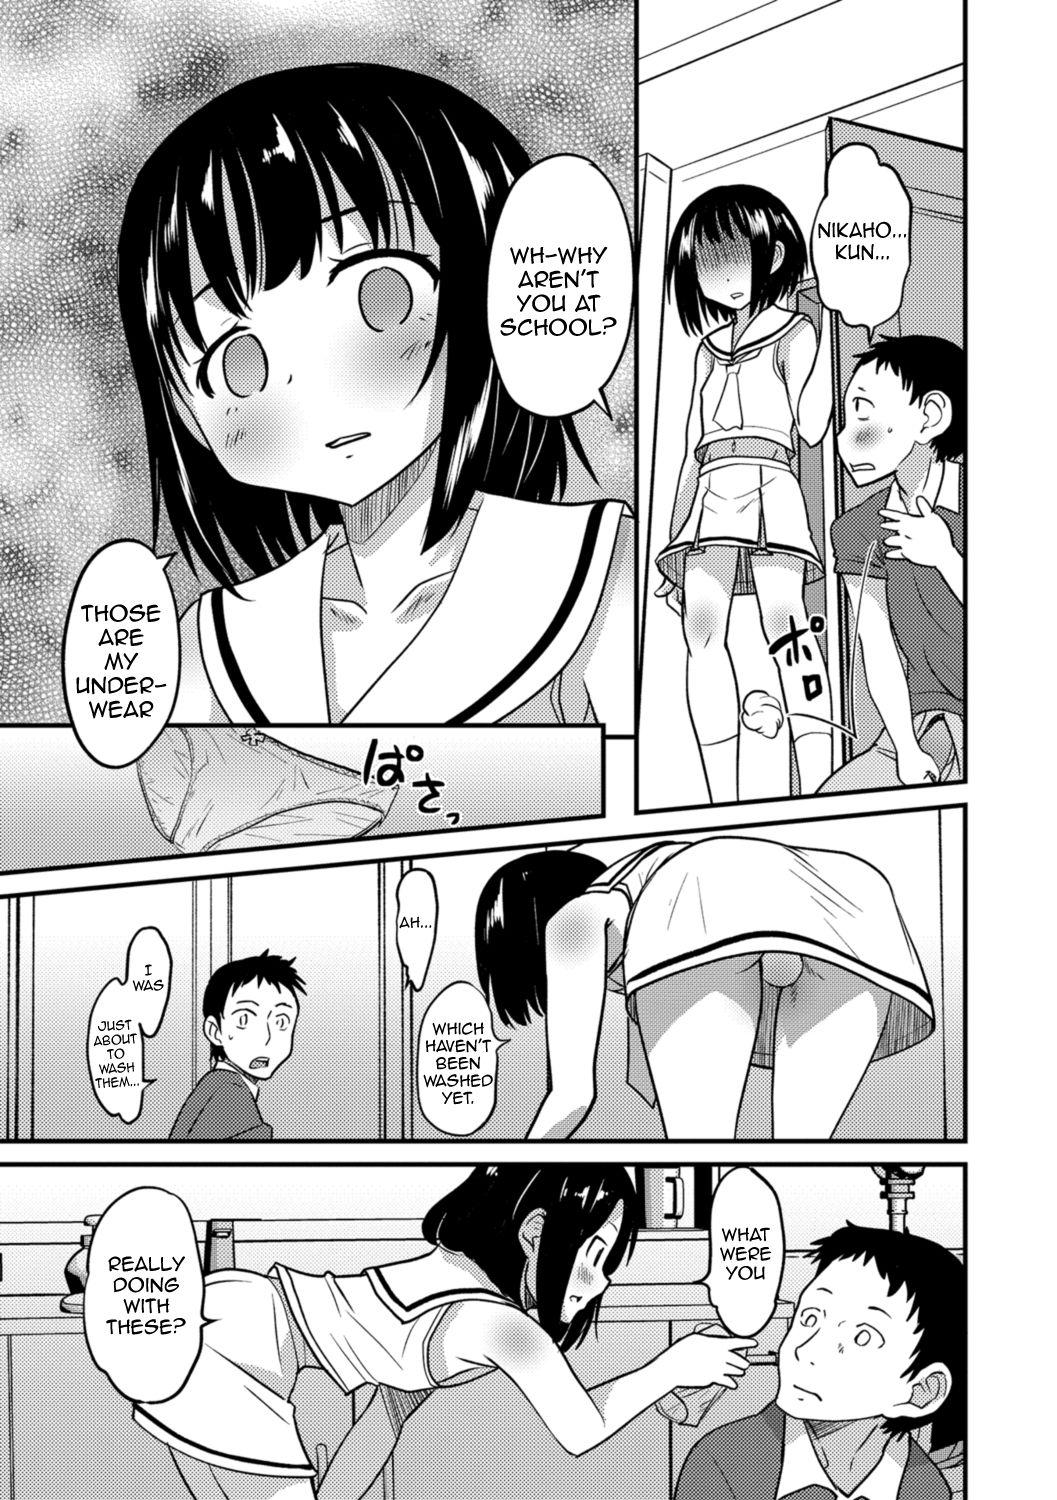 Exhib Kimi no Tsurego ni Koishiteru. | I'm in Love With Your Child From a Previous Marriage. Free Real Porn - Page 7